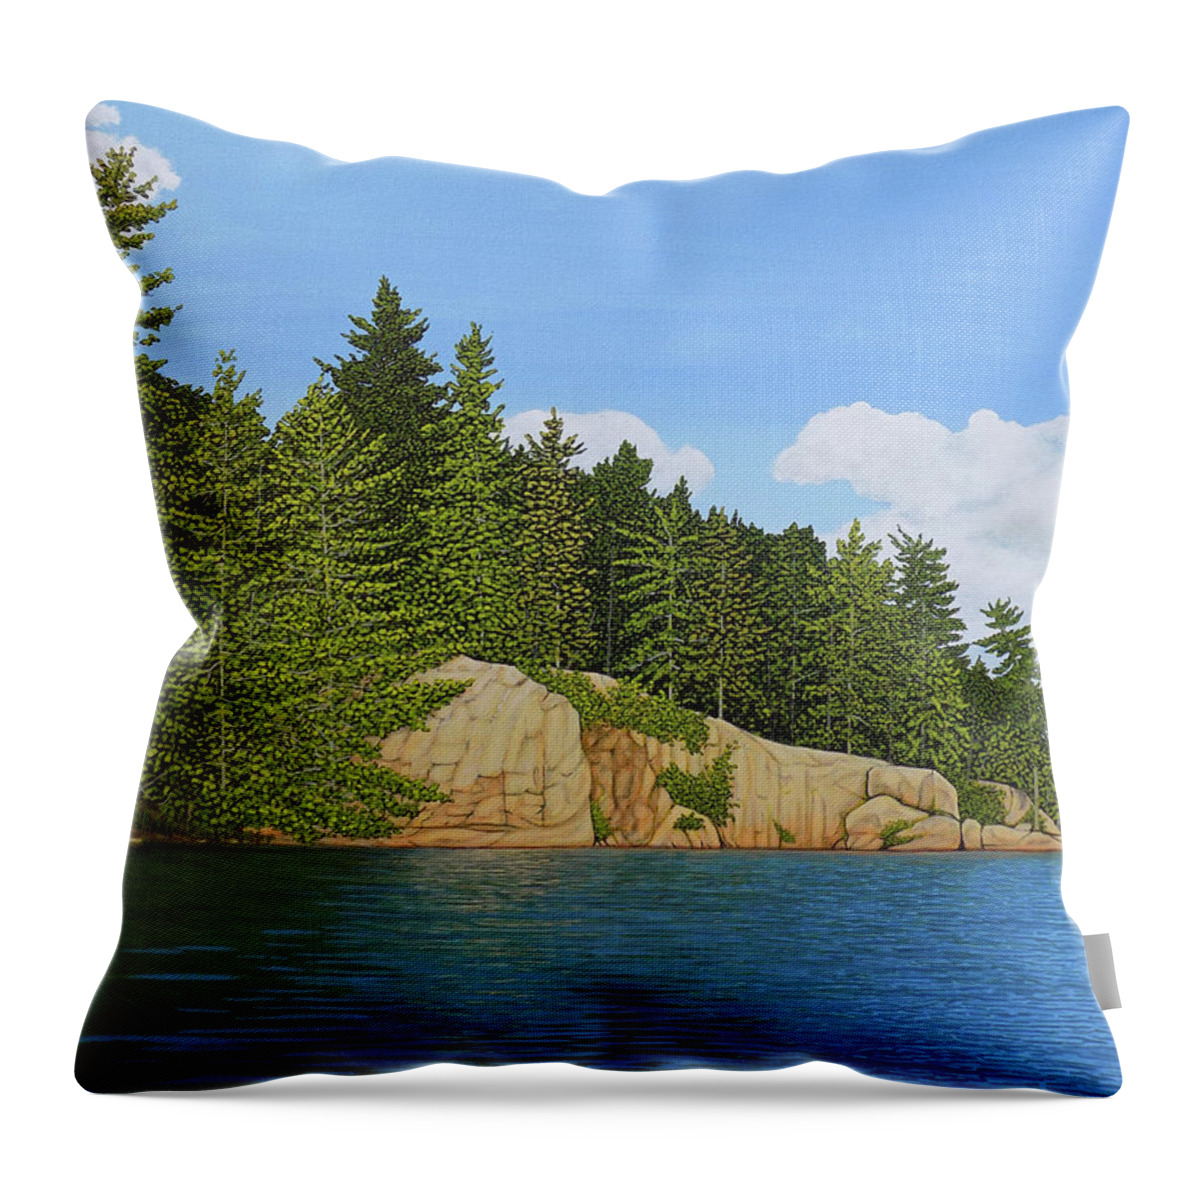 Muskoka Throw Pillow featuring the painting Matthew's Paddle by Kenneth M Kirsch